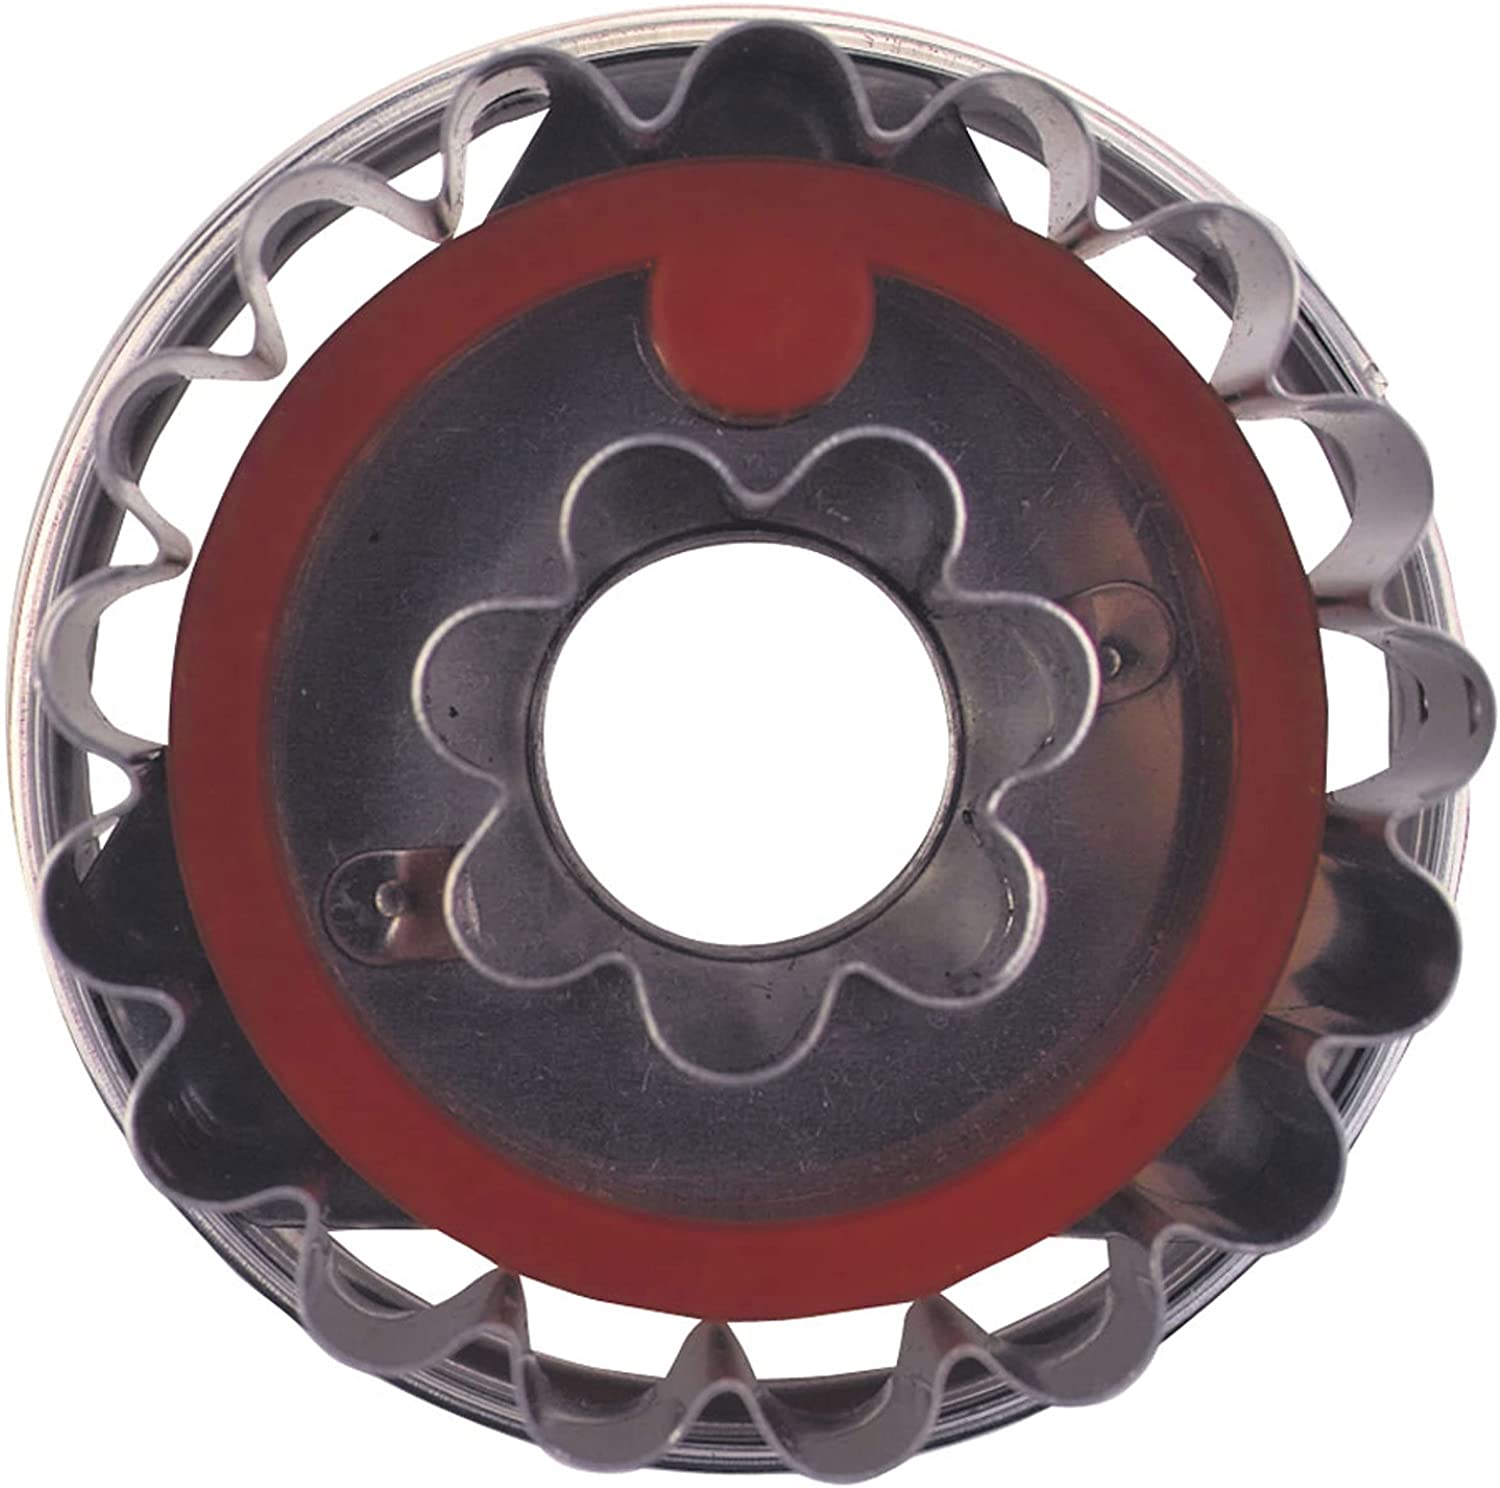 Staedter Städter 966025 Linzer Cookie Cutter with Ejector Flower Stainless Steel 4.8 x 4.8 x 4.8 cm, Silver/Red